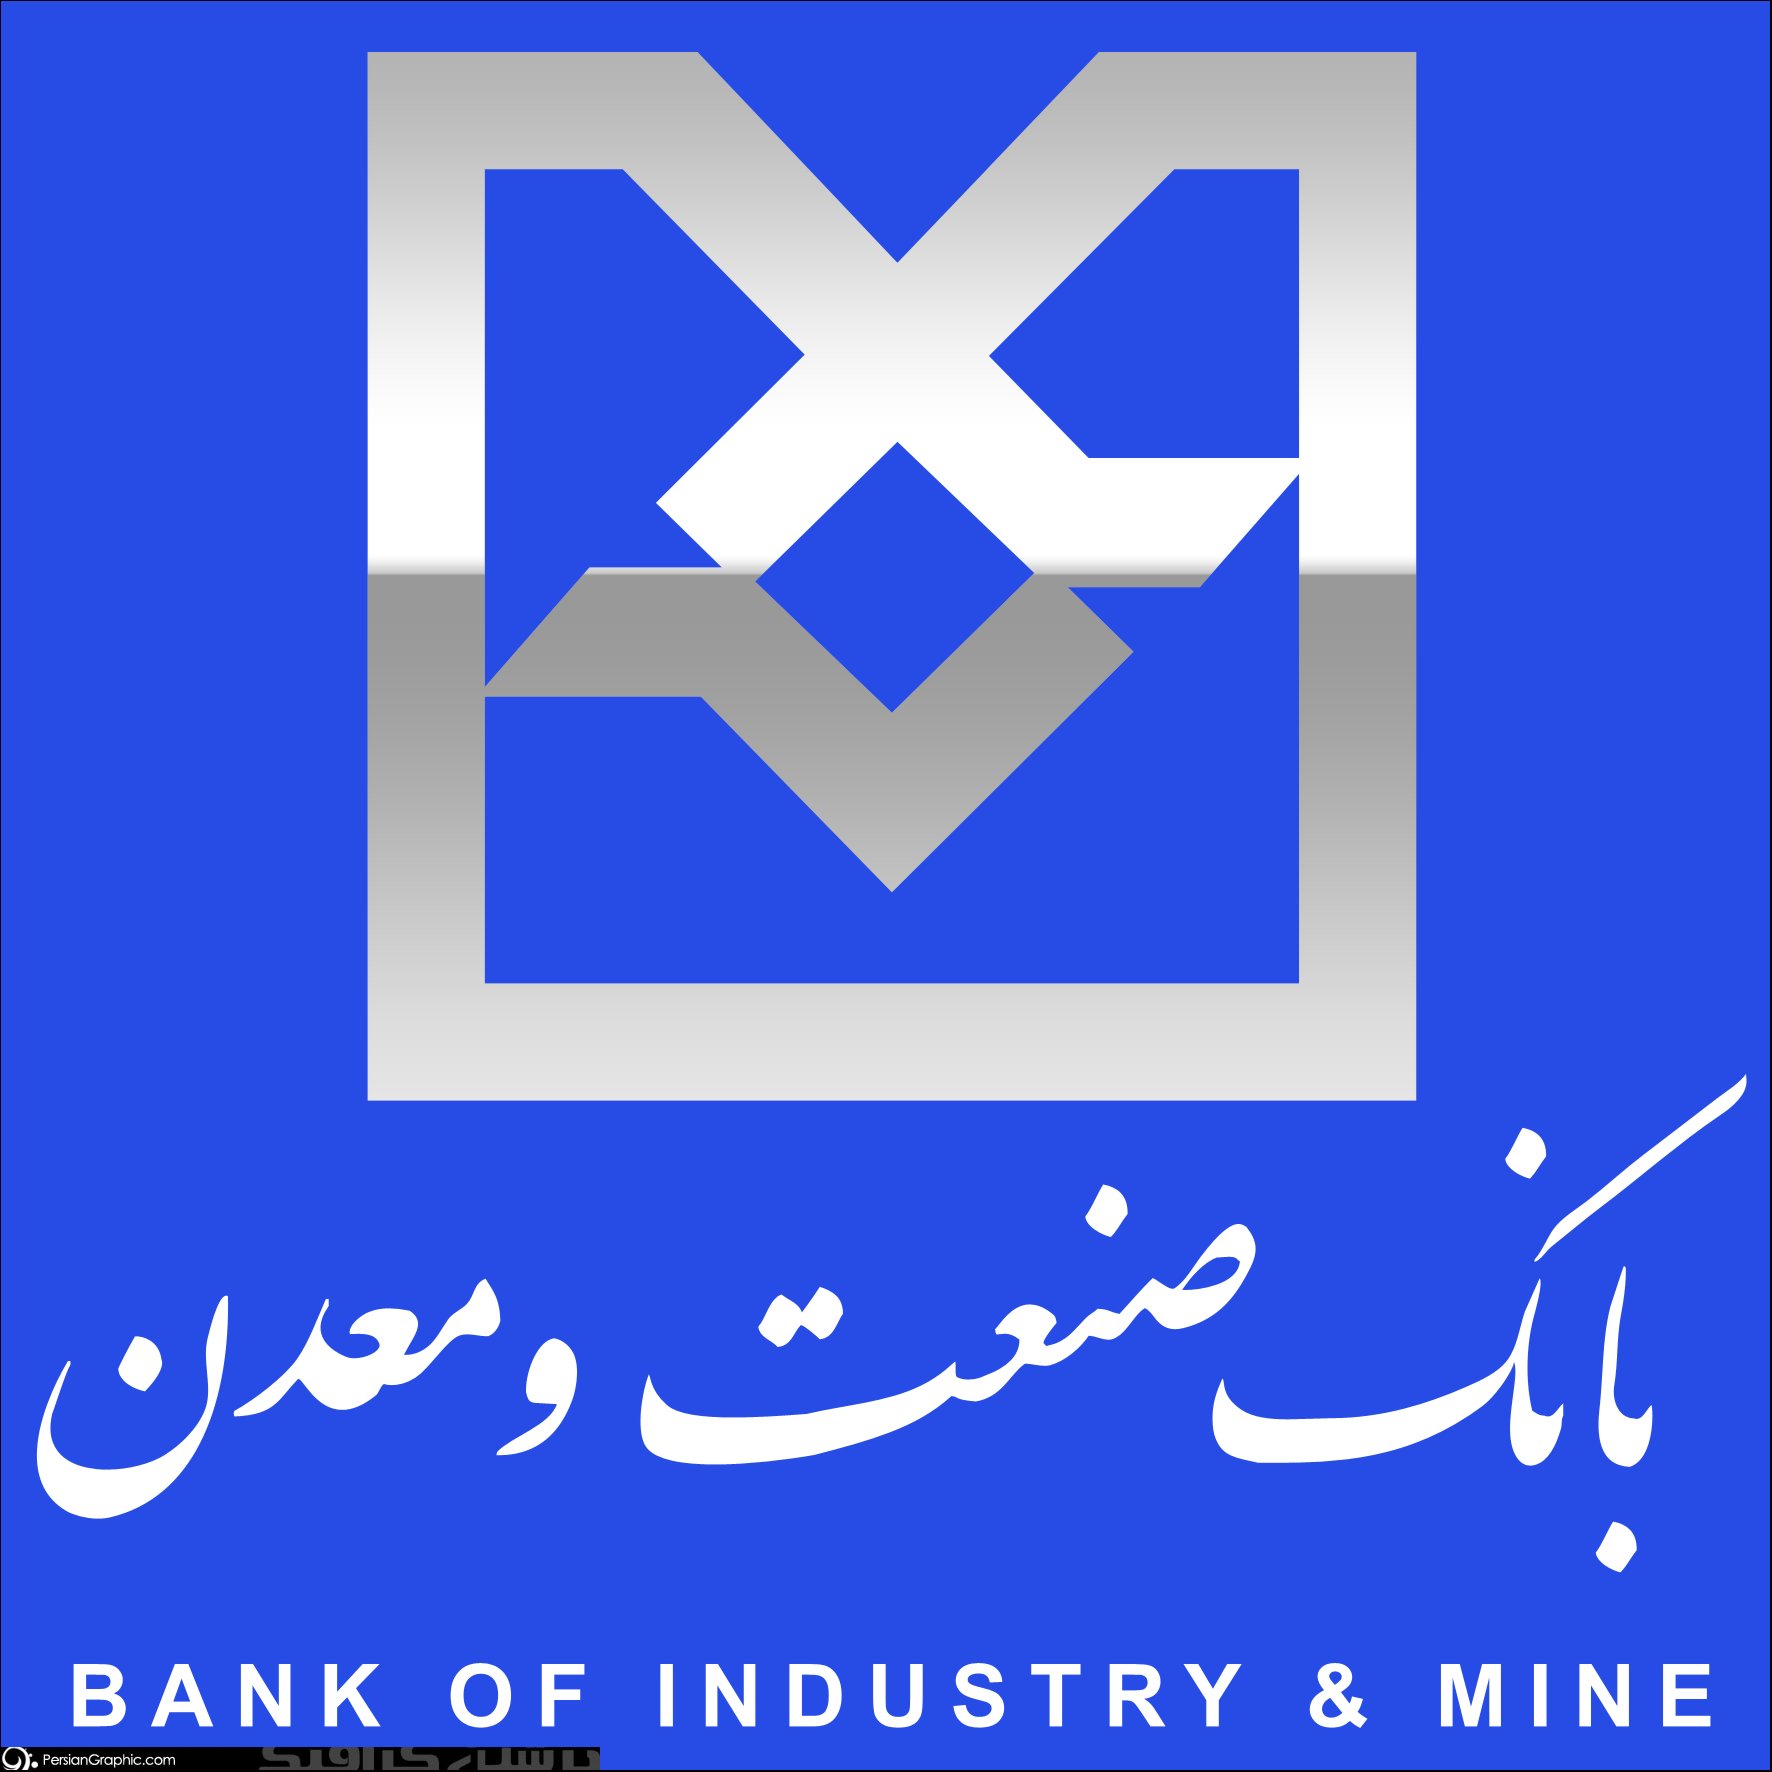 Utilization of 133 industrial projects financed by the Bank of Industry and Mines